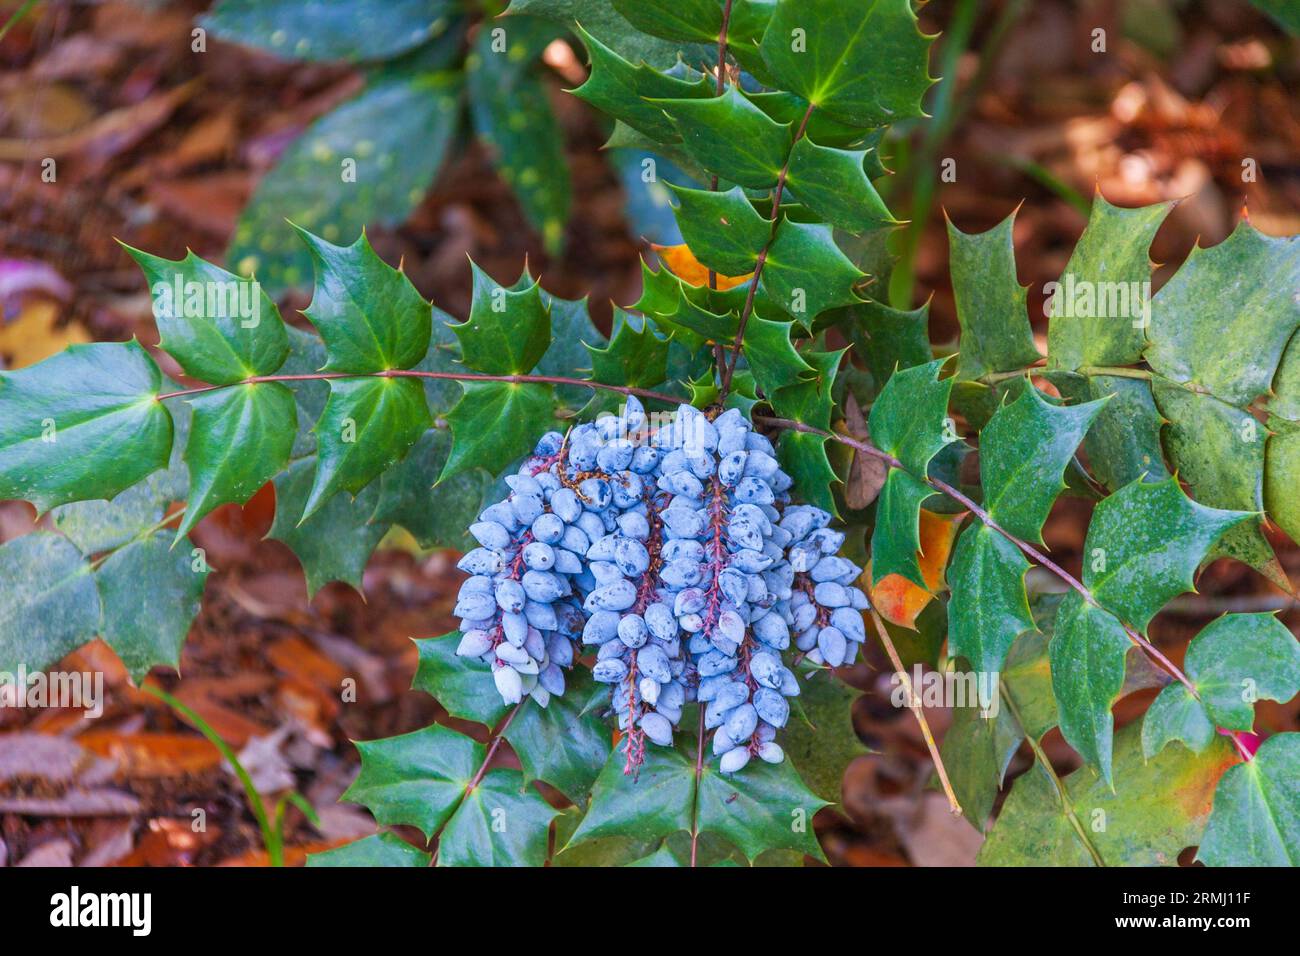 Leatherleaf Mahonia, Mahonia bealei, with blue berries, at Bellingrath Gardens near Moblie, Alabama in early spring. Stock Photo